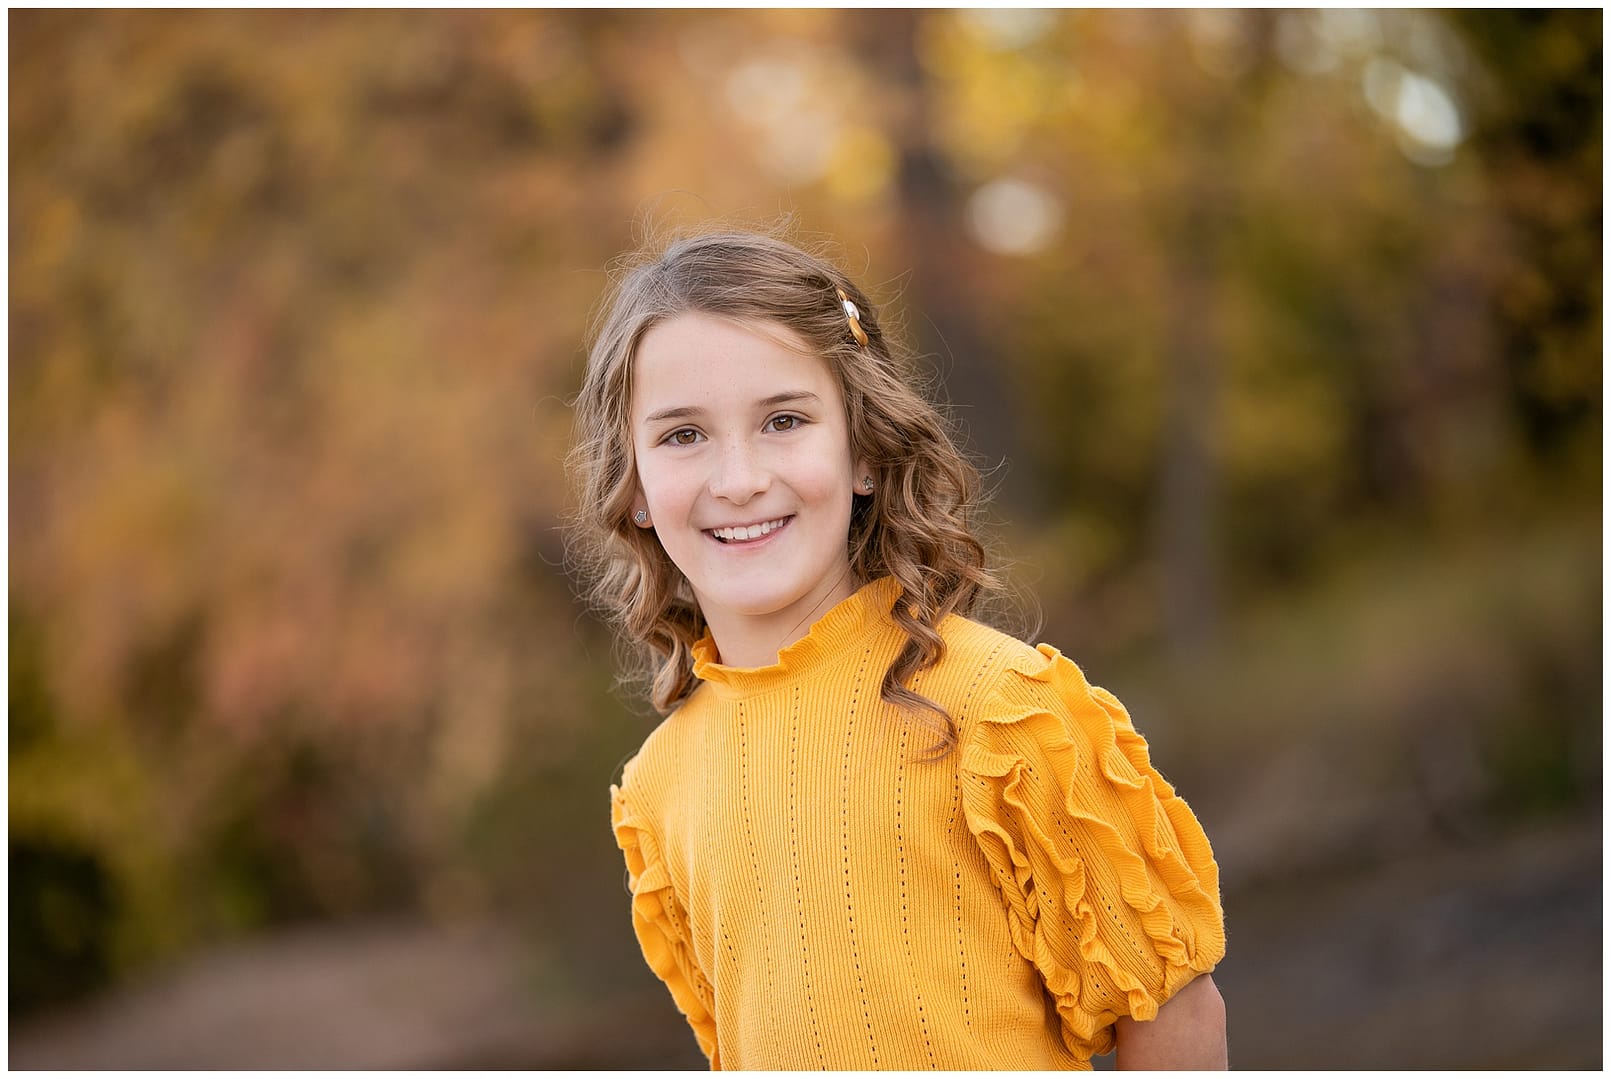 Young girl in yellow sweater. Photos by Tiffany Hix Photography.